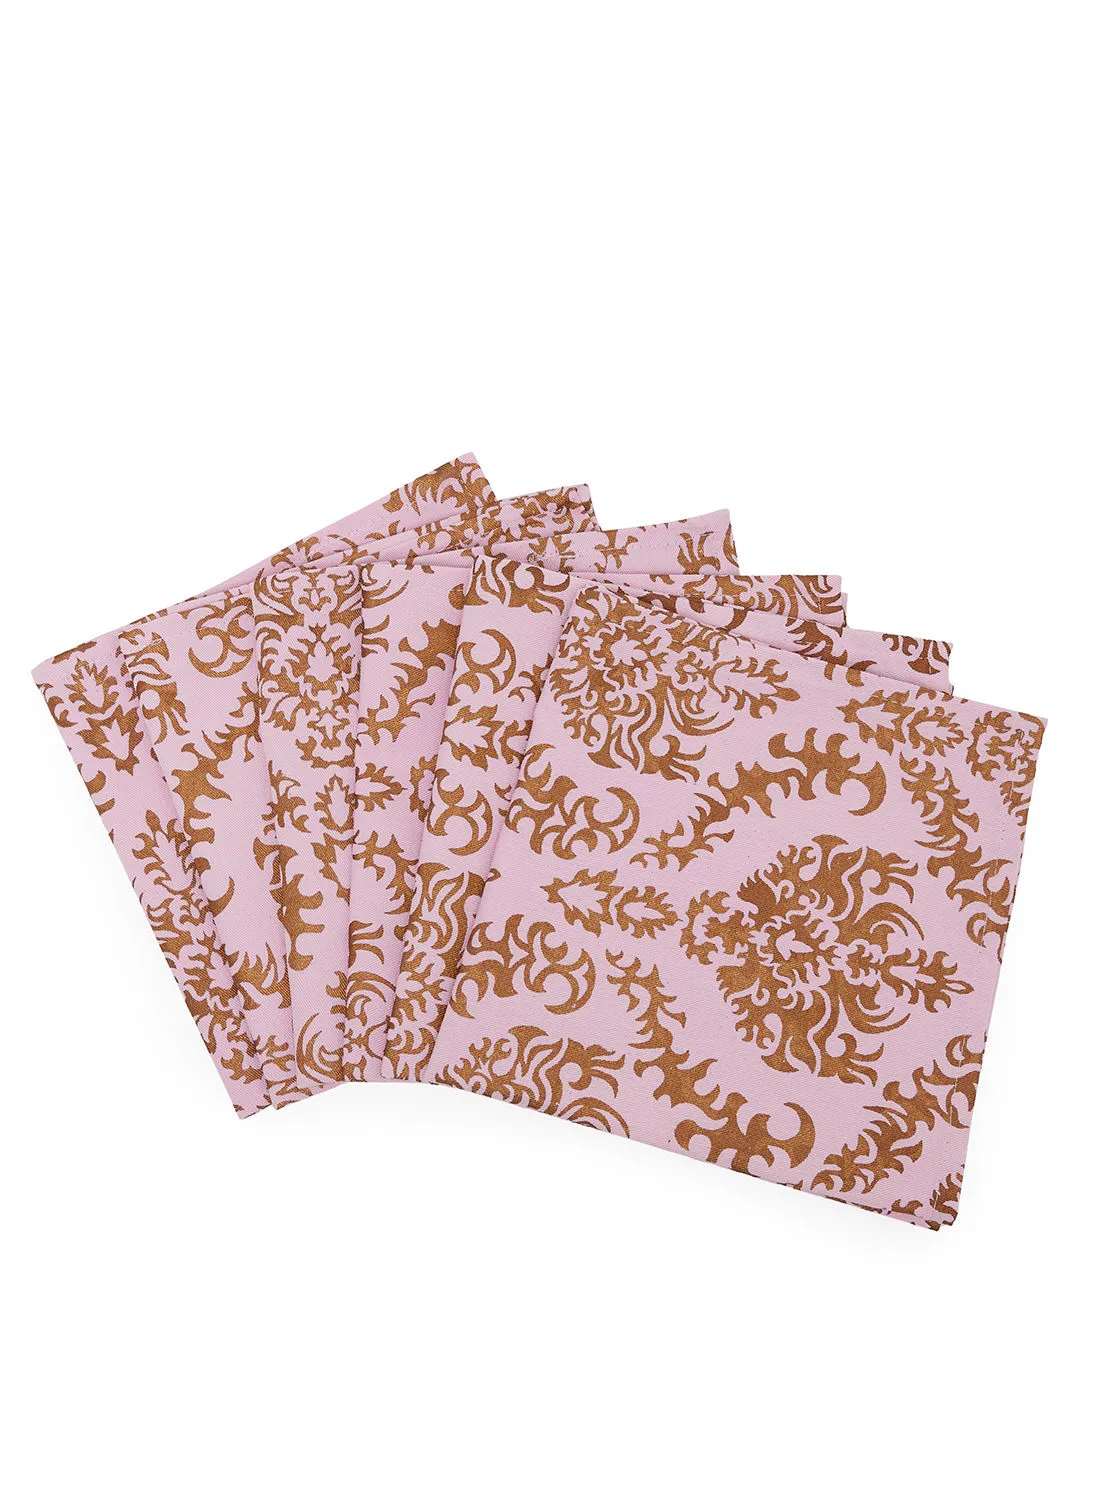 Amal 6 Piece Table Napkin Set - Printed Cloth Napkins For Dining Table - Napkins - Gold/Ivory